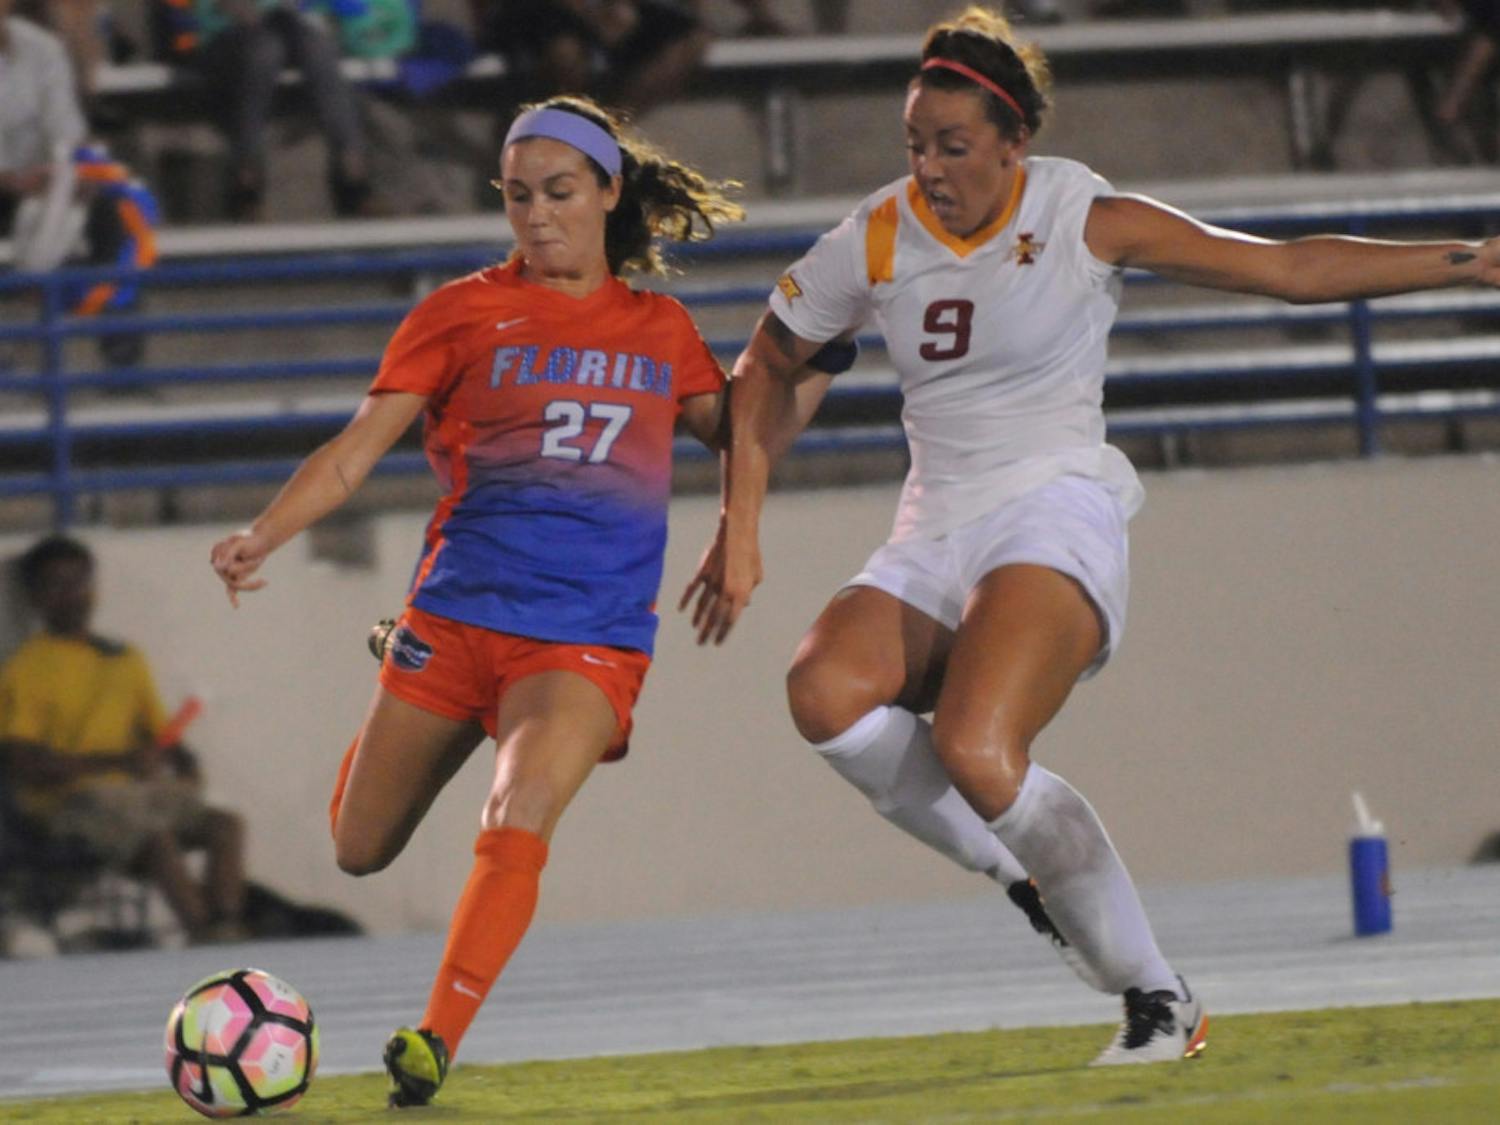 UF midfielder Mayra Pelayo passes the ball during Florida's 5-2 win against Iowa State on Aug. 19, 2016, at James G. Pressly Stadium.